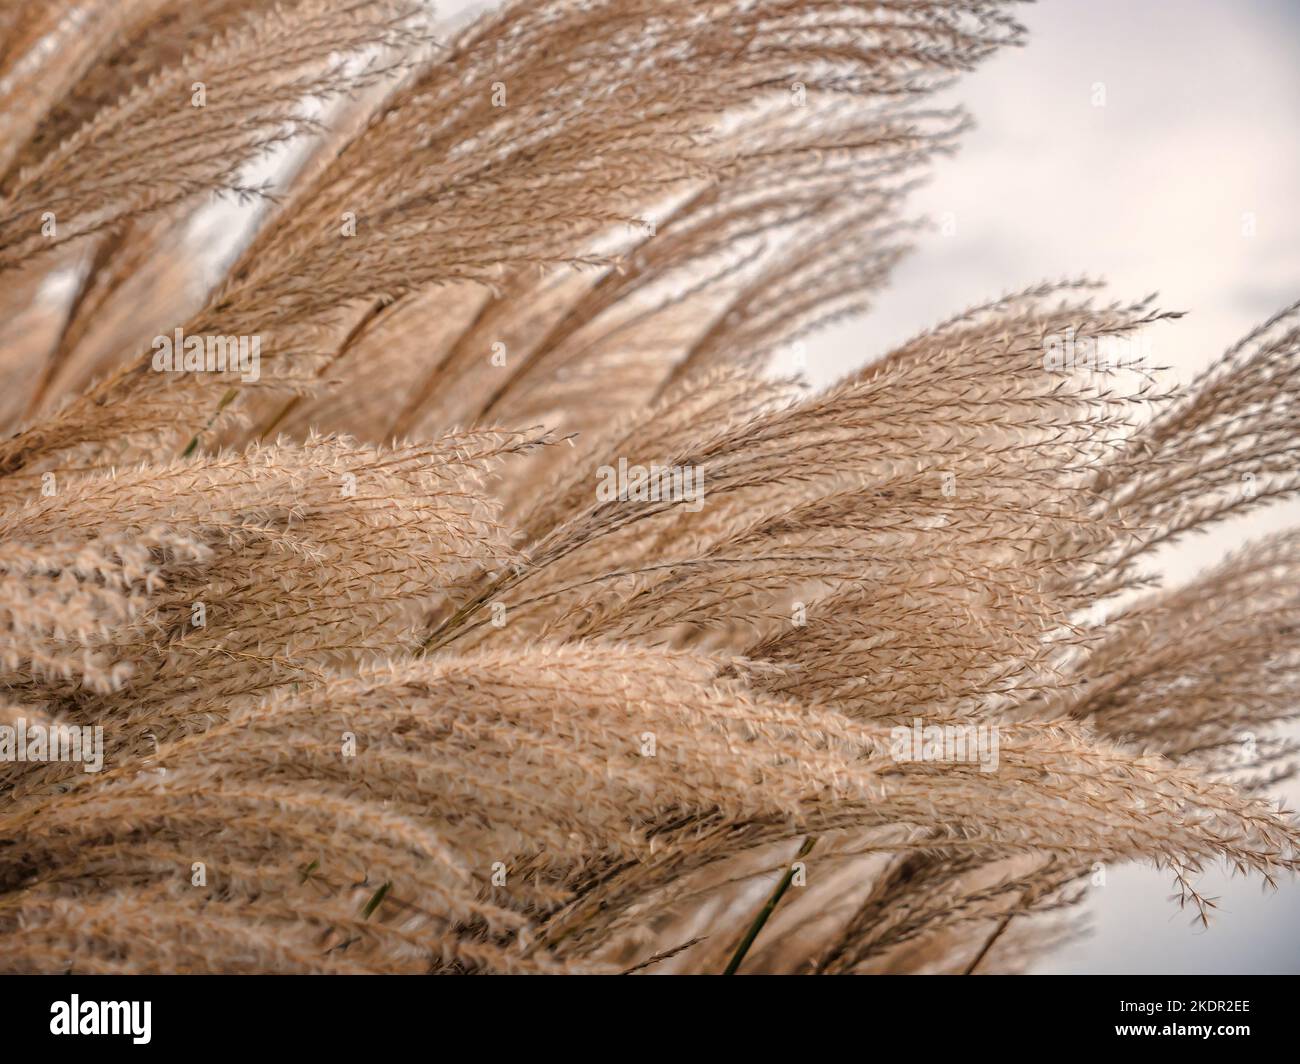 Closeup of giant dry Miscanthus grass spikes waveing in the wind Stock Photo